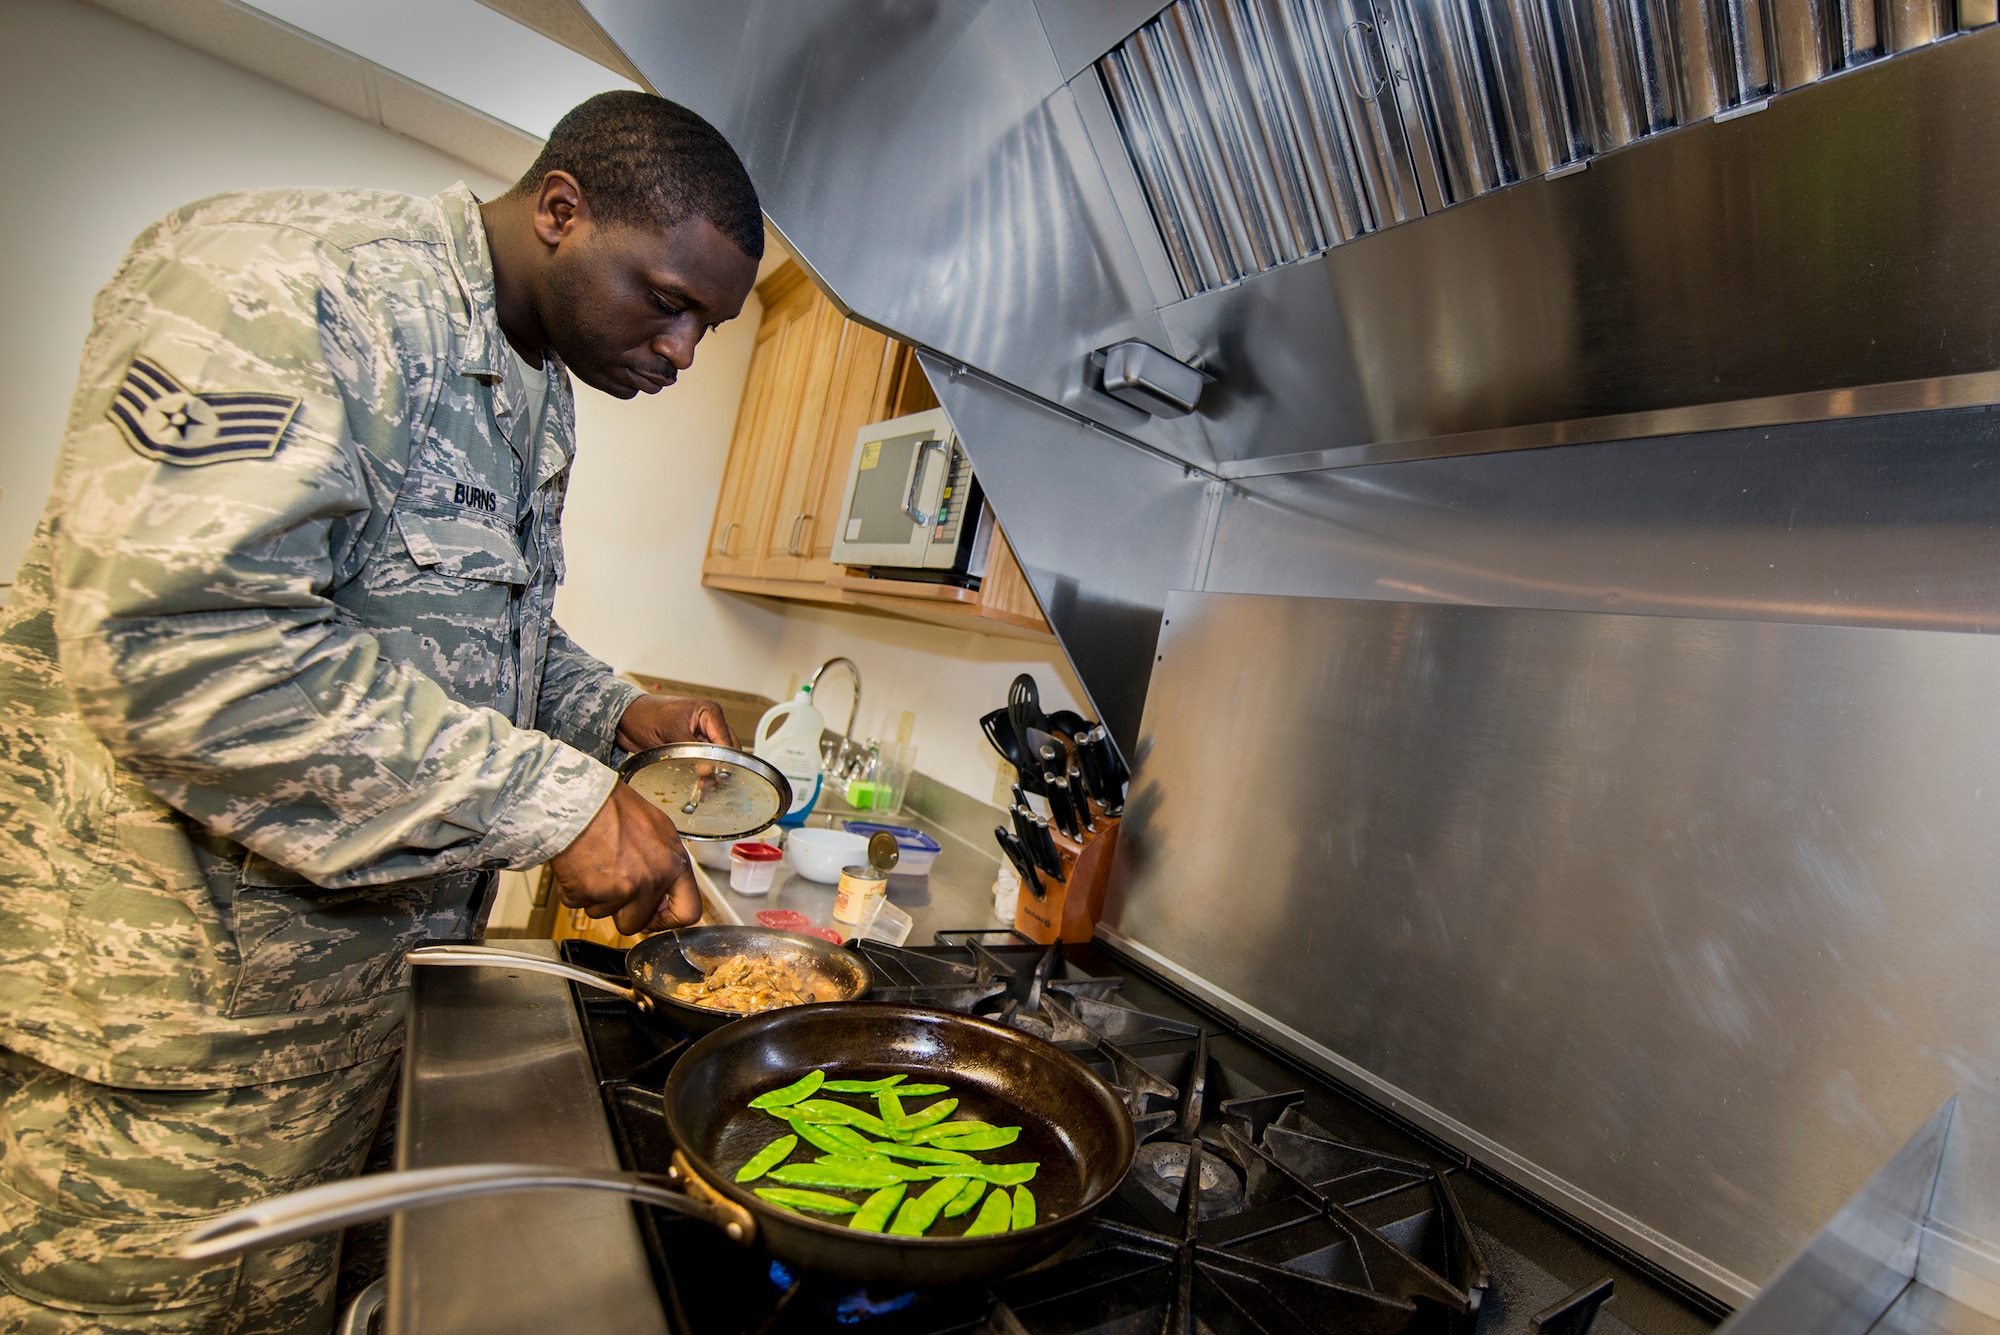 Staff Sgt. Phillip Burns II prepares Monterey chicken July 17, 2014, on Moody Air Force Base, Ga. Burns garnished his plate with sweet peas and mushroom sauce. He is a 23d Civil Engineer Squadron fire inspector. (U.S. Air Force photo/Airman 1st Class Ryan Callaghan)